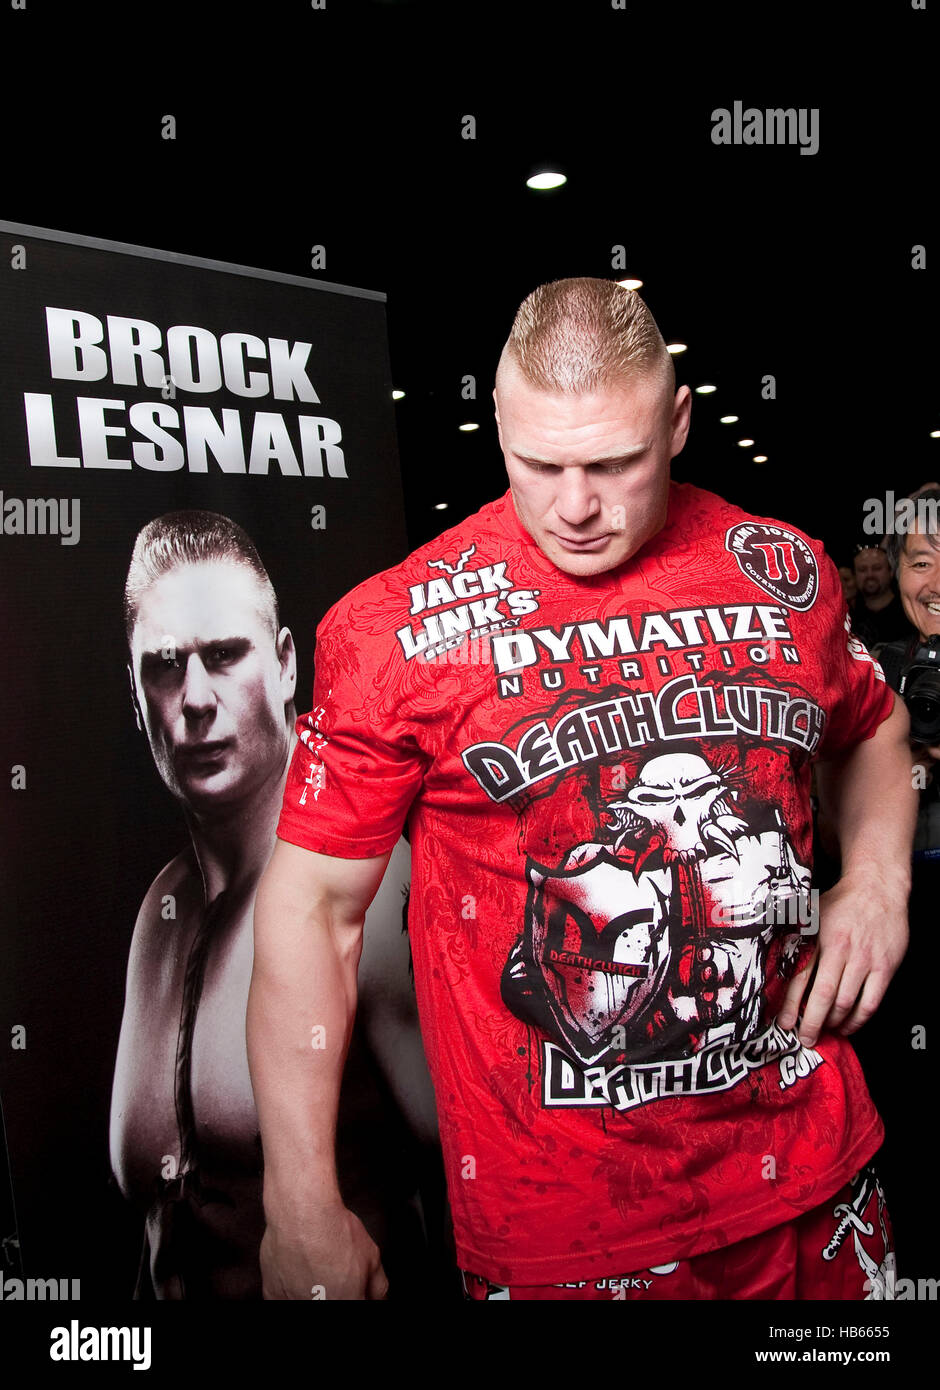 UFC fighter Brock Lesnar during a training session before UFC 116 on June  30, 2010 in Las Vegas, Nevada. Photo by Francis Specker Stock Photo - Alamy